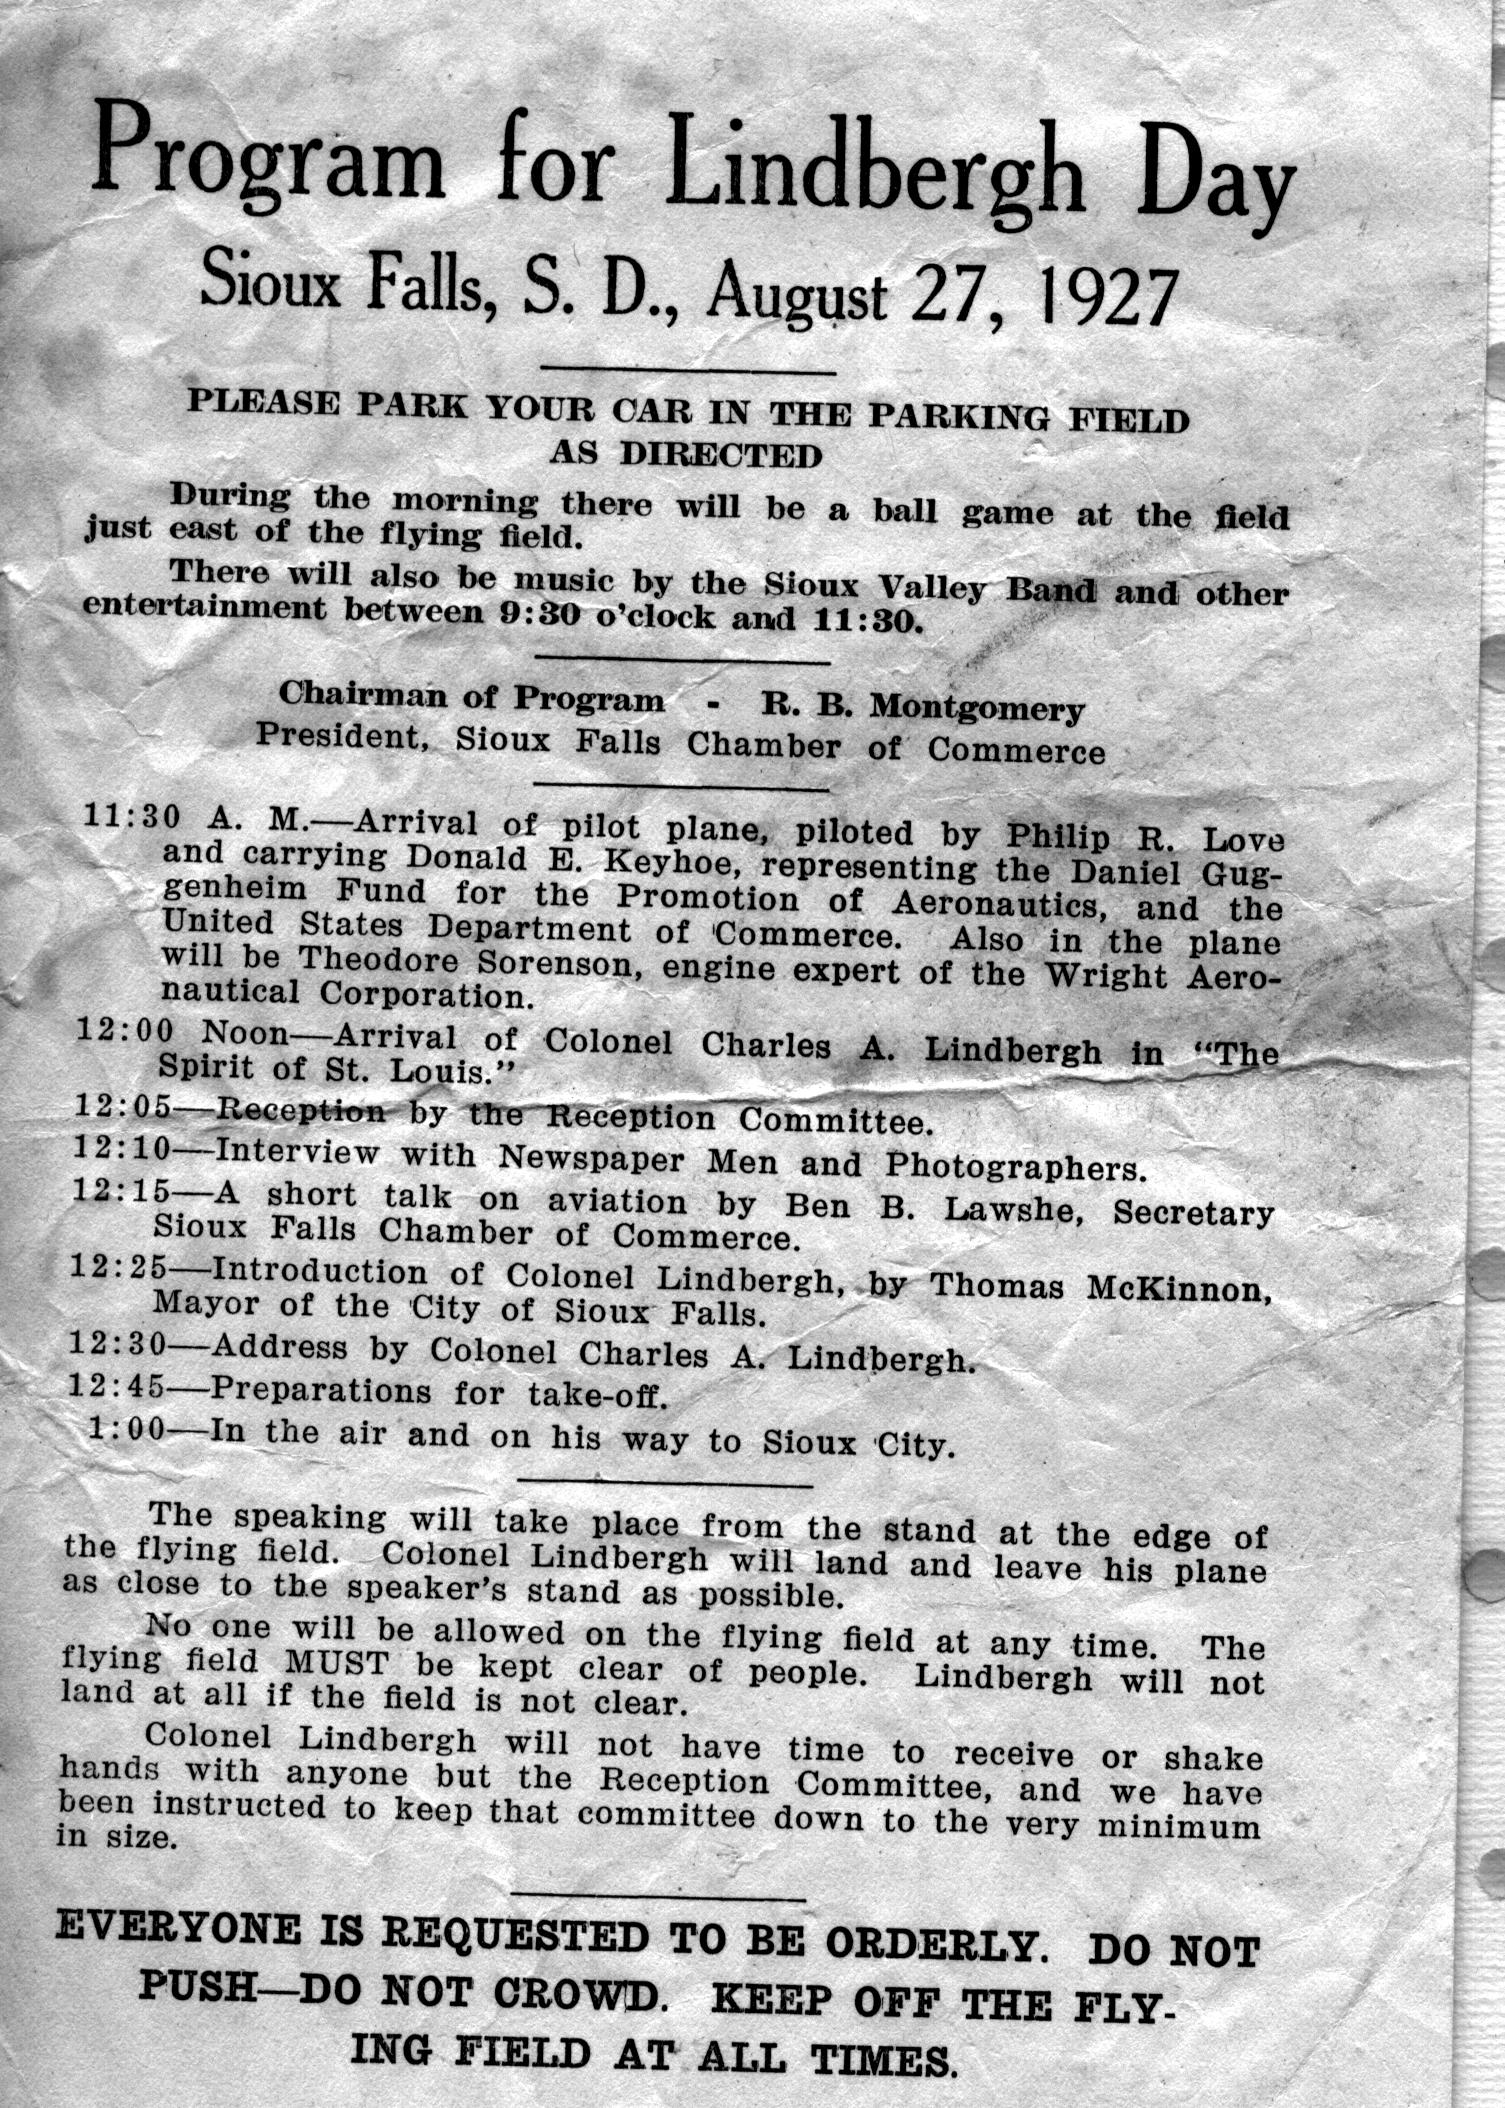 Program for Charles Lindbergh's brief visit to Sioux Falls, South Dakota, on August 27, 1927.